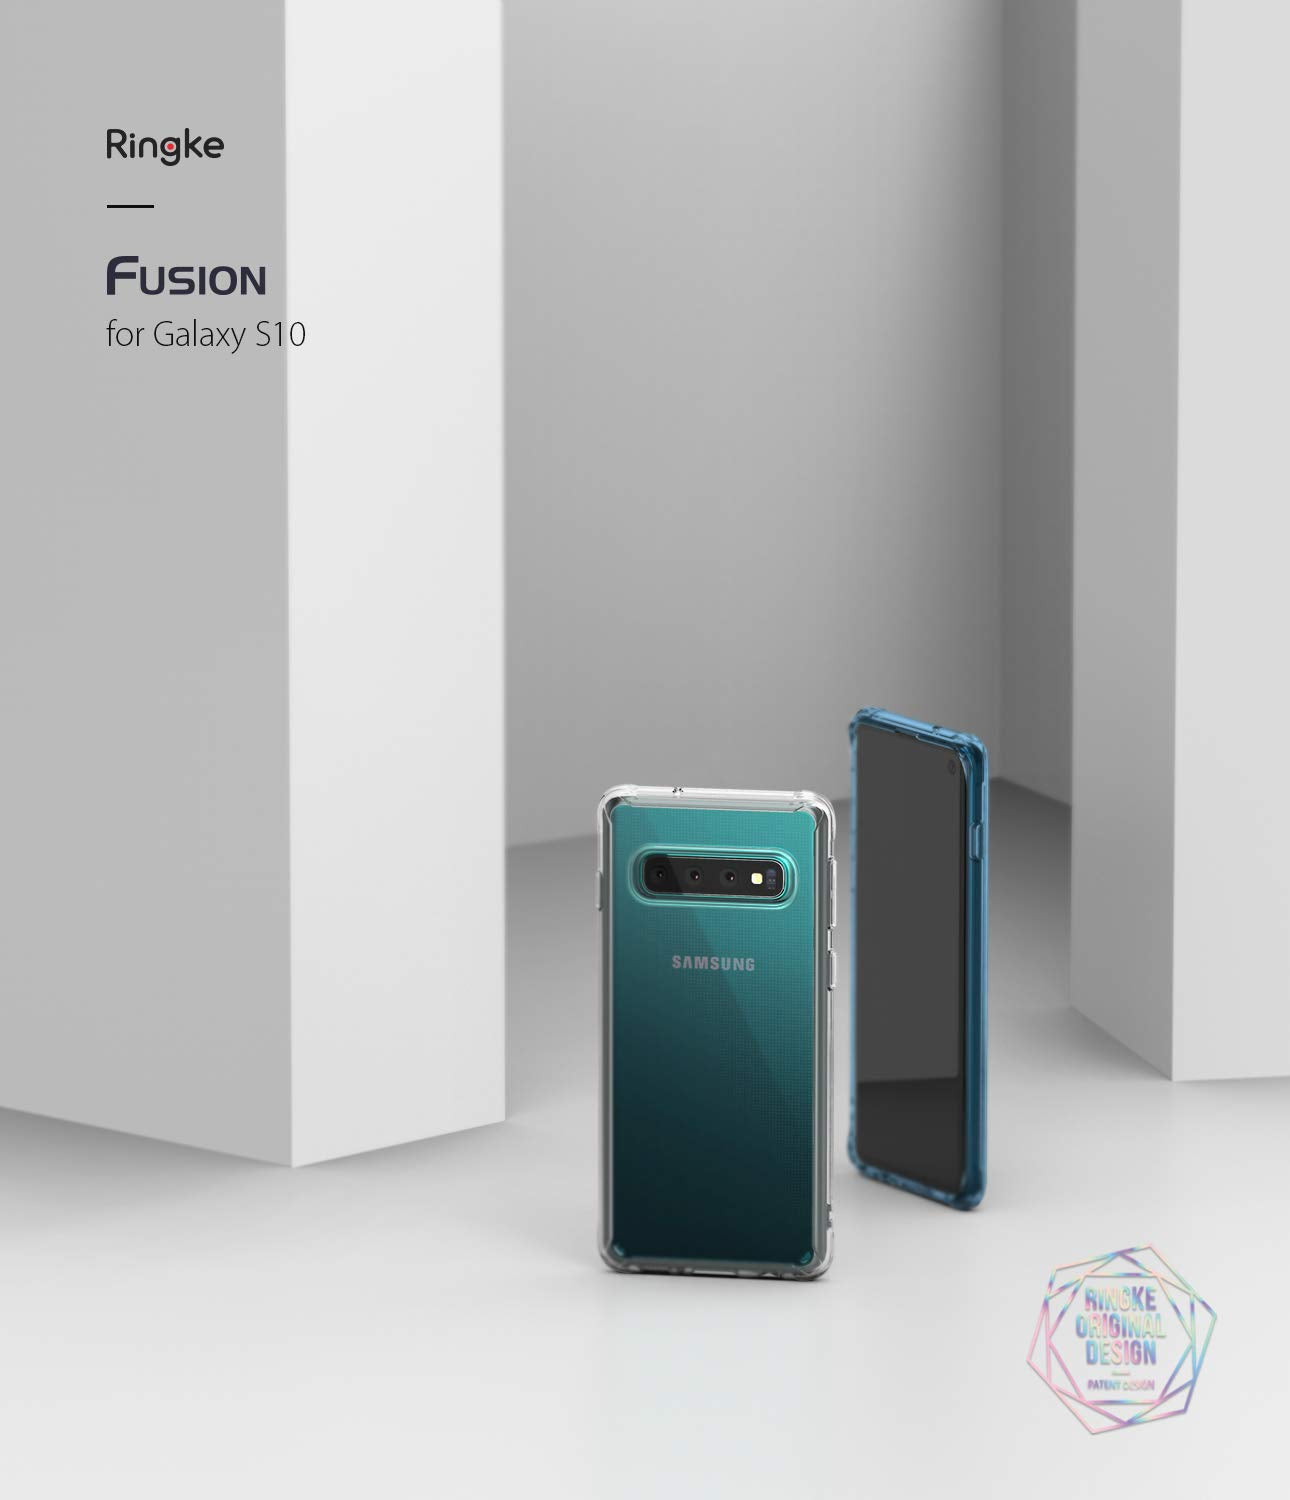 galaxy s10, case, clear, fusion case